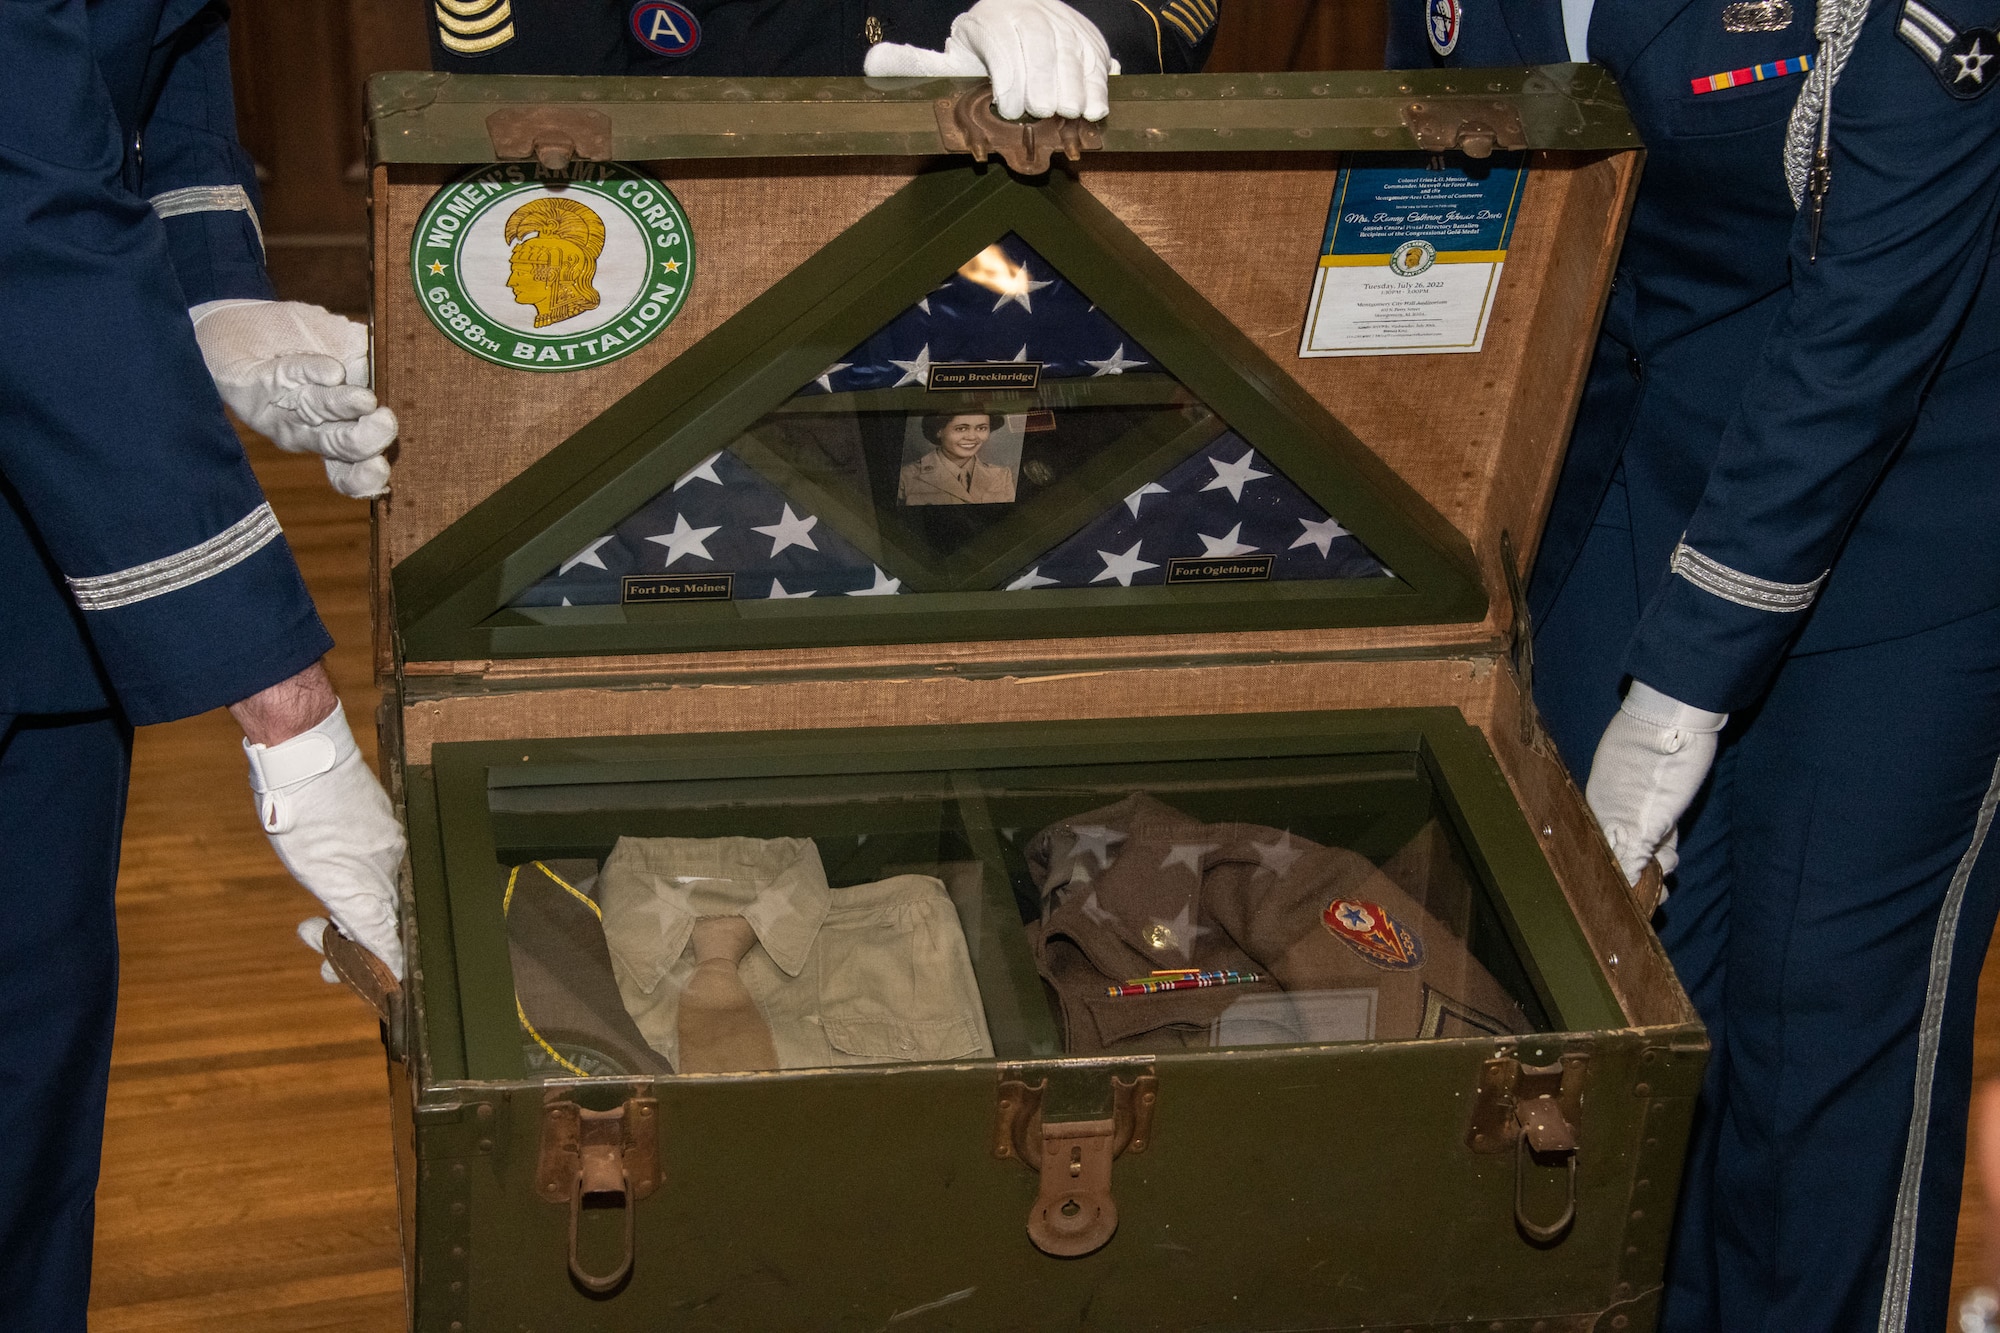 Mrs.
Davis’s shadowbox is housed in an authentic World War II trunk. This trunk holds a uniform
pieced together by Americans across the country after hearing Mrs. Davis’s story. Complete
with a replica of Mrs. Davis’s medals and an original World War II Women’s Army Corps Patch.
The flags encased were flown at each base Mrs. Davis served, including Fort Oglethorp, GA,
Camp Breckinridge, KY, and Fort Des Moines, IA.